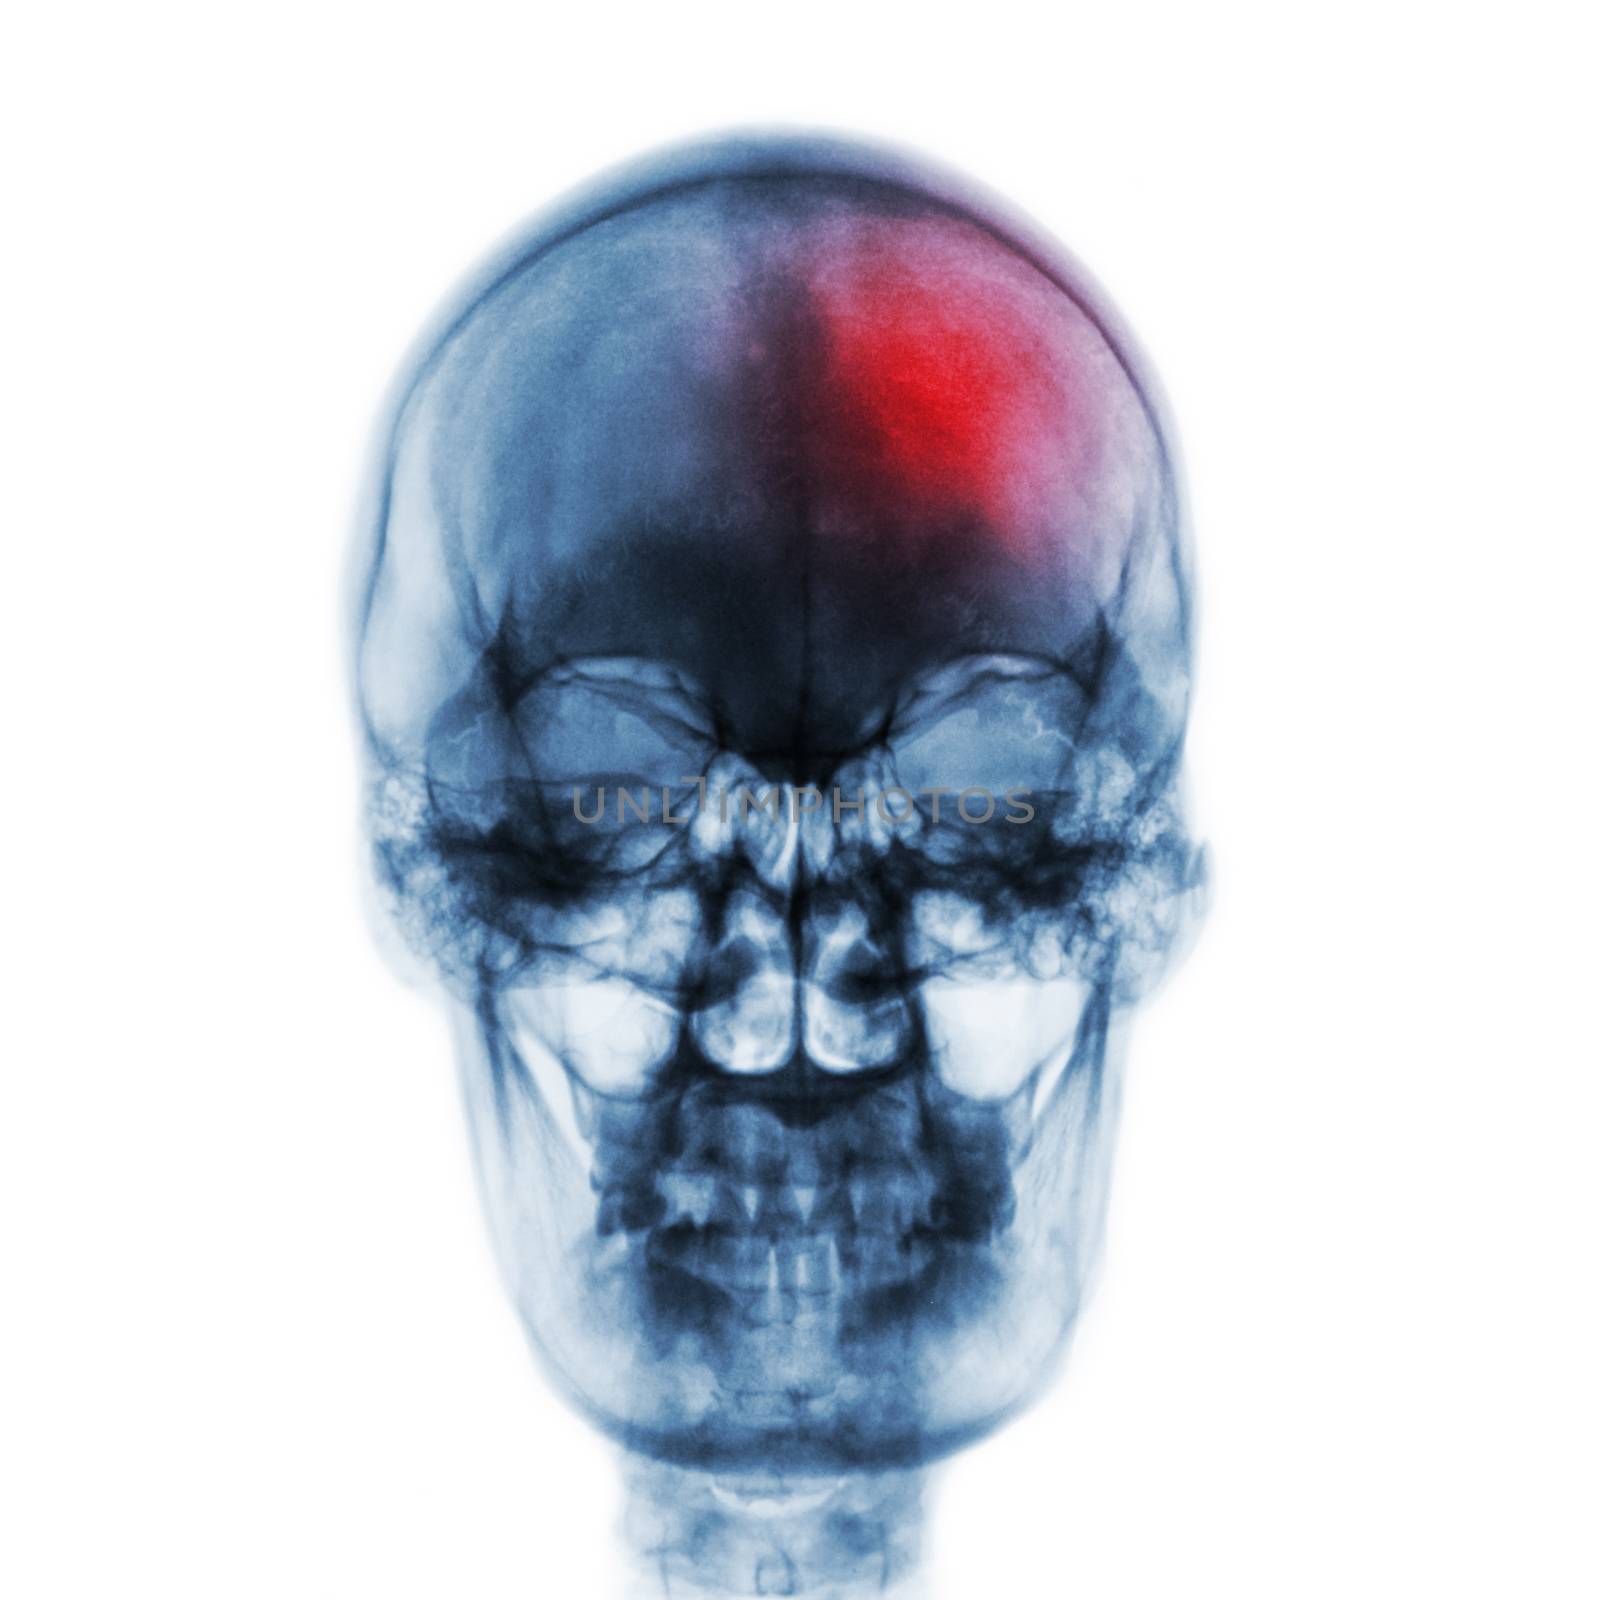 Stroke ( Cerebrovascular accident ) . Film x-ray skull of human with red area . Front view .